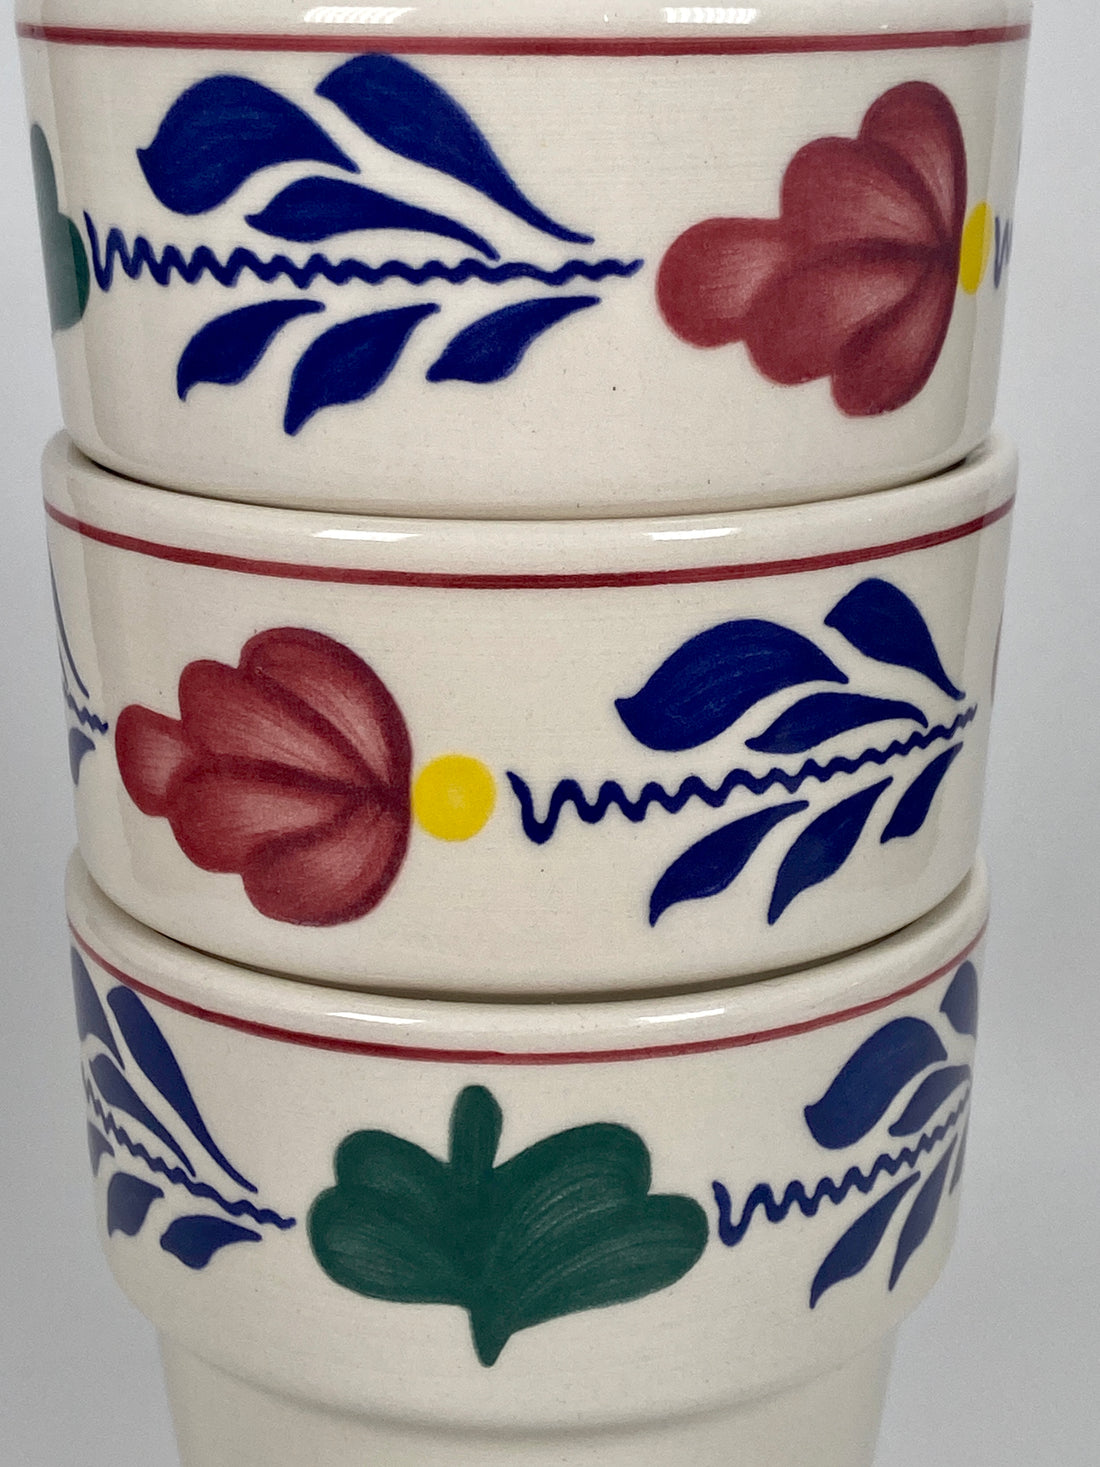 Porcelain mugs with Dutch Boerenbont motif with blue green red and yellow leaves and flowers - Big Bite Dutch Treats